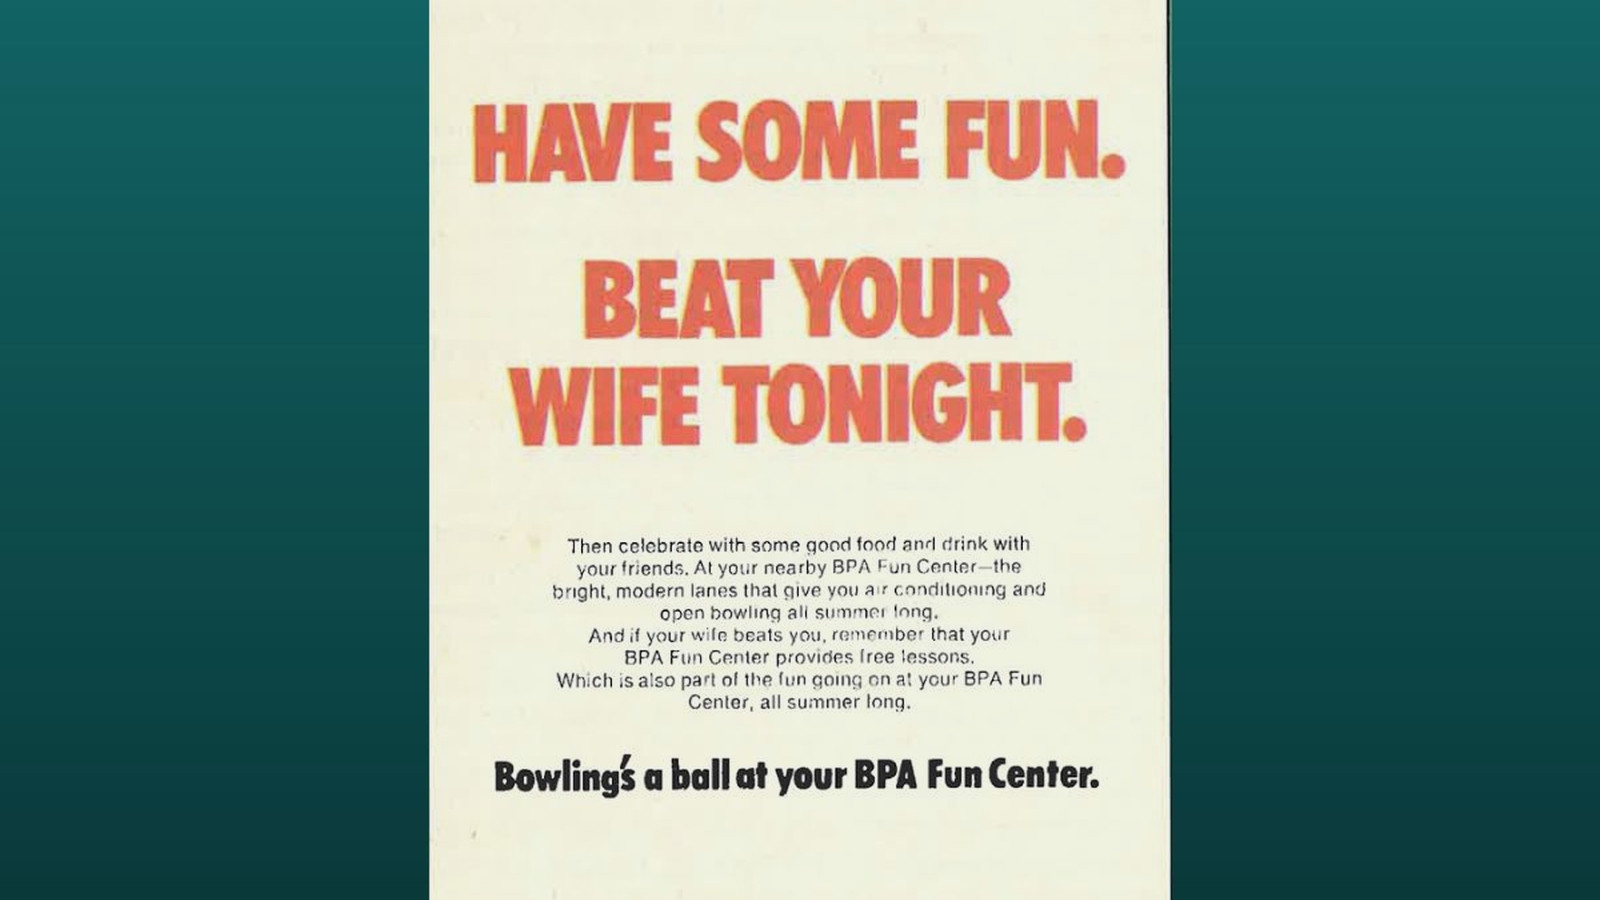 Porn Inappropriate Vintage Ads - Is This 'Beat Your Wife Tonight' Ad from the '70s Real? | Snopes.com